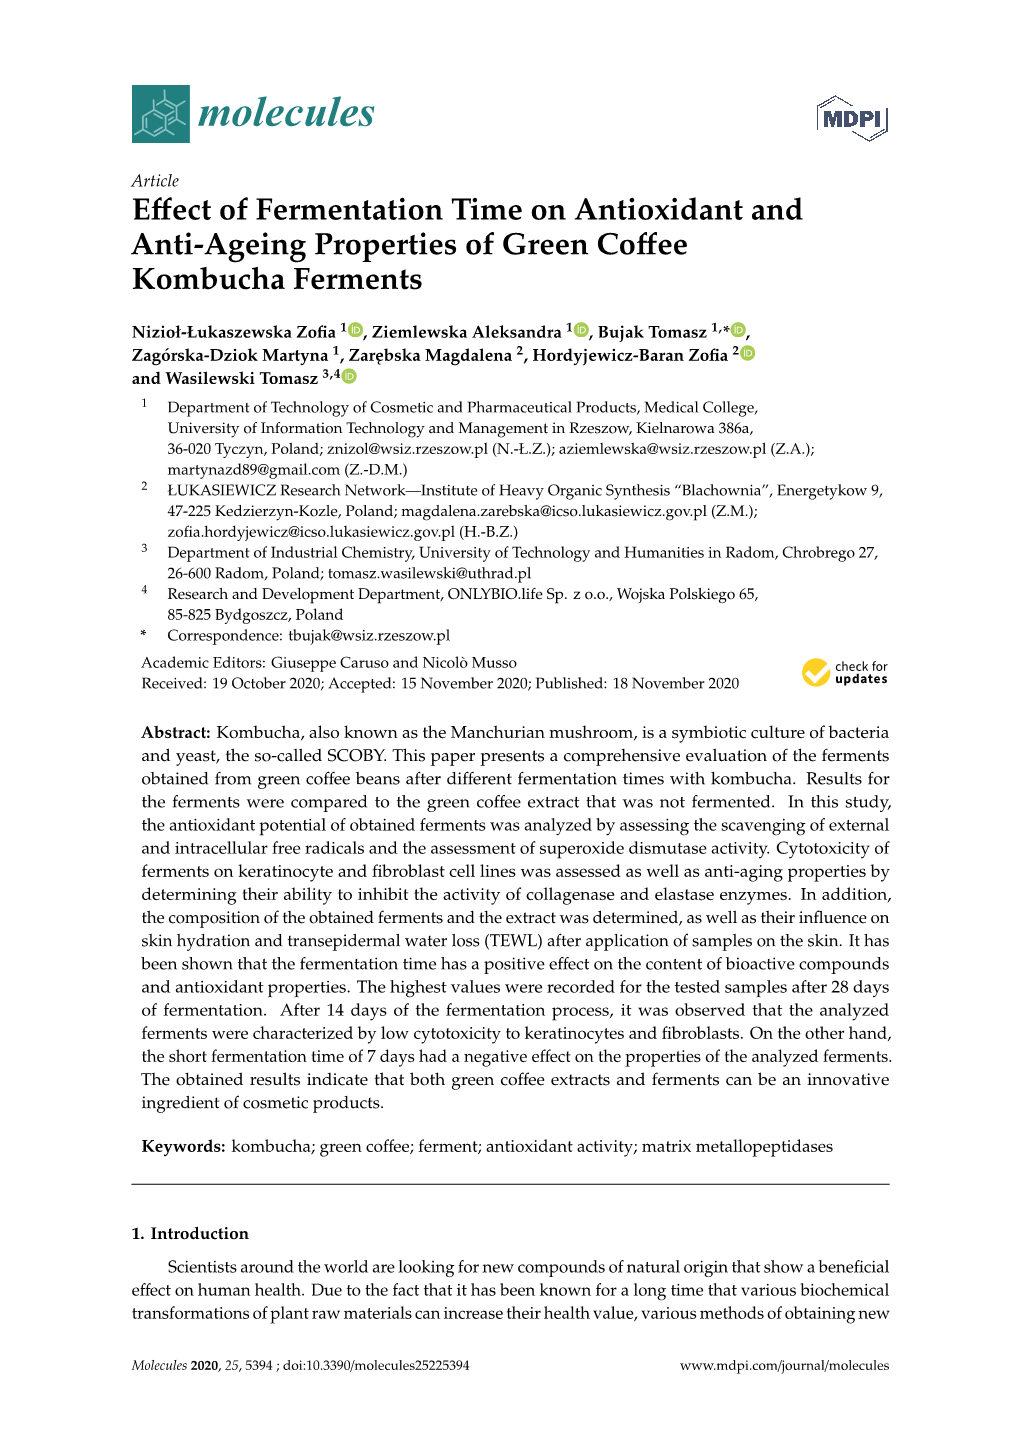 Effect of Fermentation Time on Antioxidant and Anti-Ageing